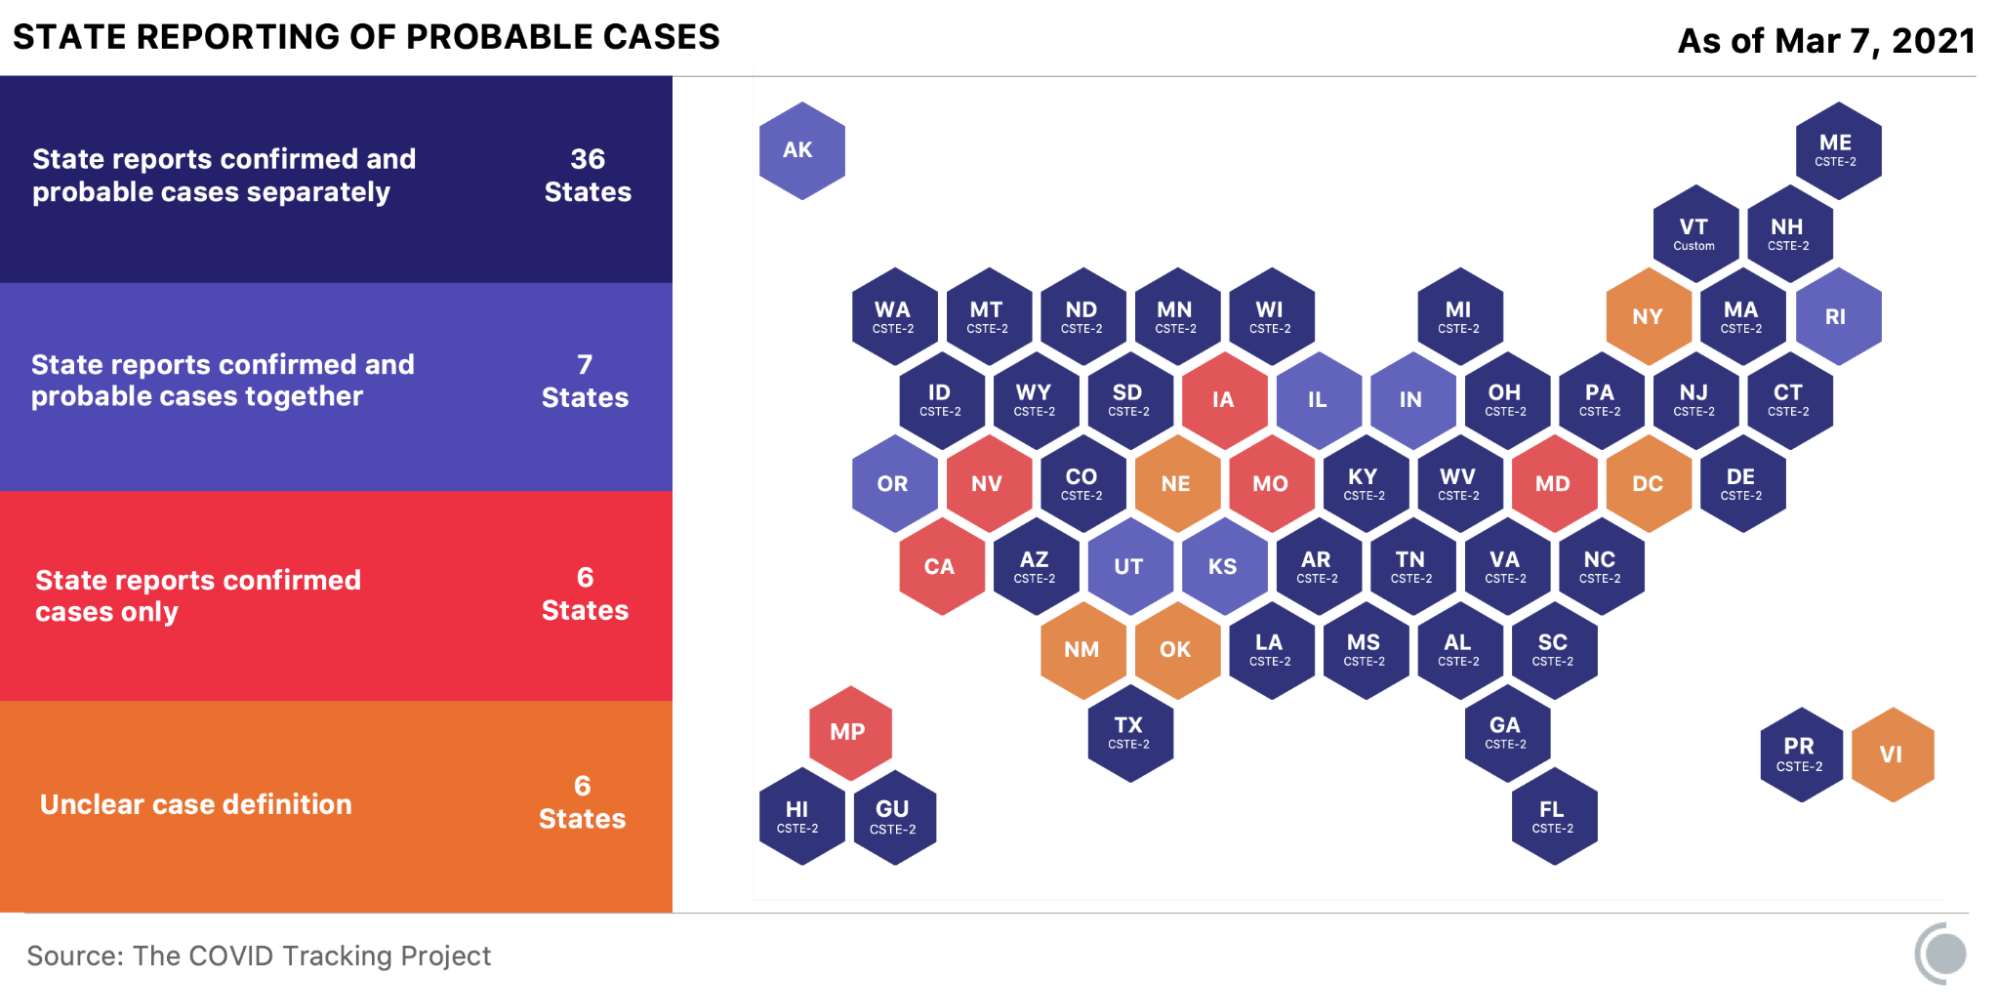 A map shows which states report confirmed and probable cases together, which states report a breakdown and which probable case definition they are using, which states report confirmed cases only, and which states have an unclear case definition as of March 7, 2021.